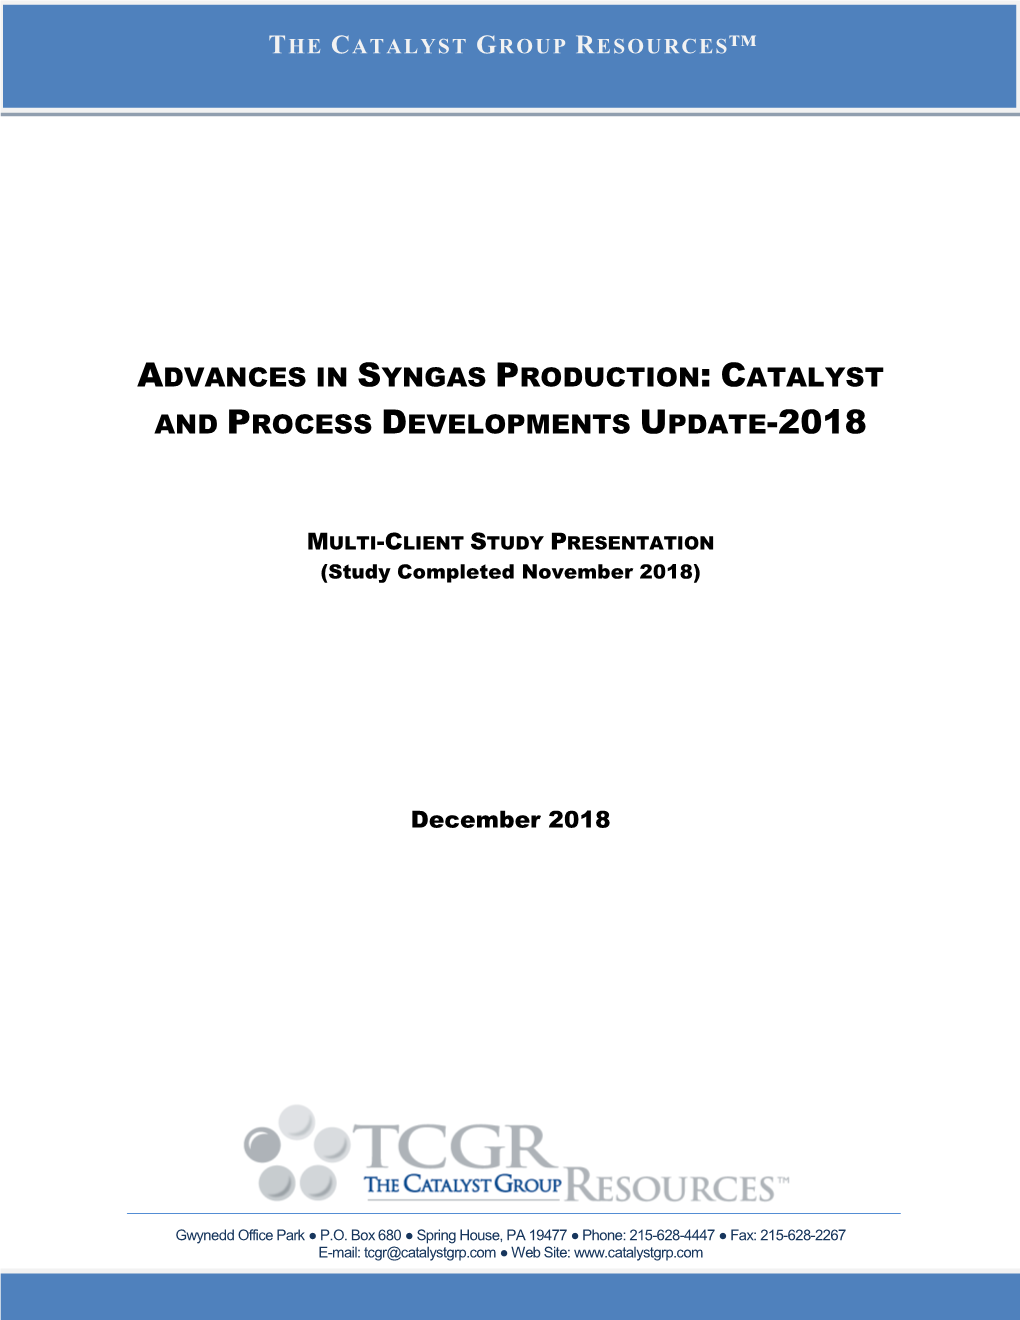 Advances in Syngas Production: Catalyst and Process Developments Update-2018